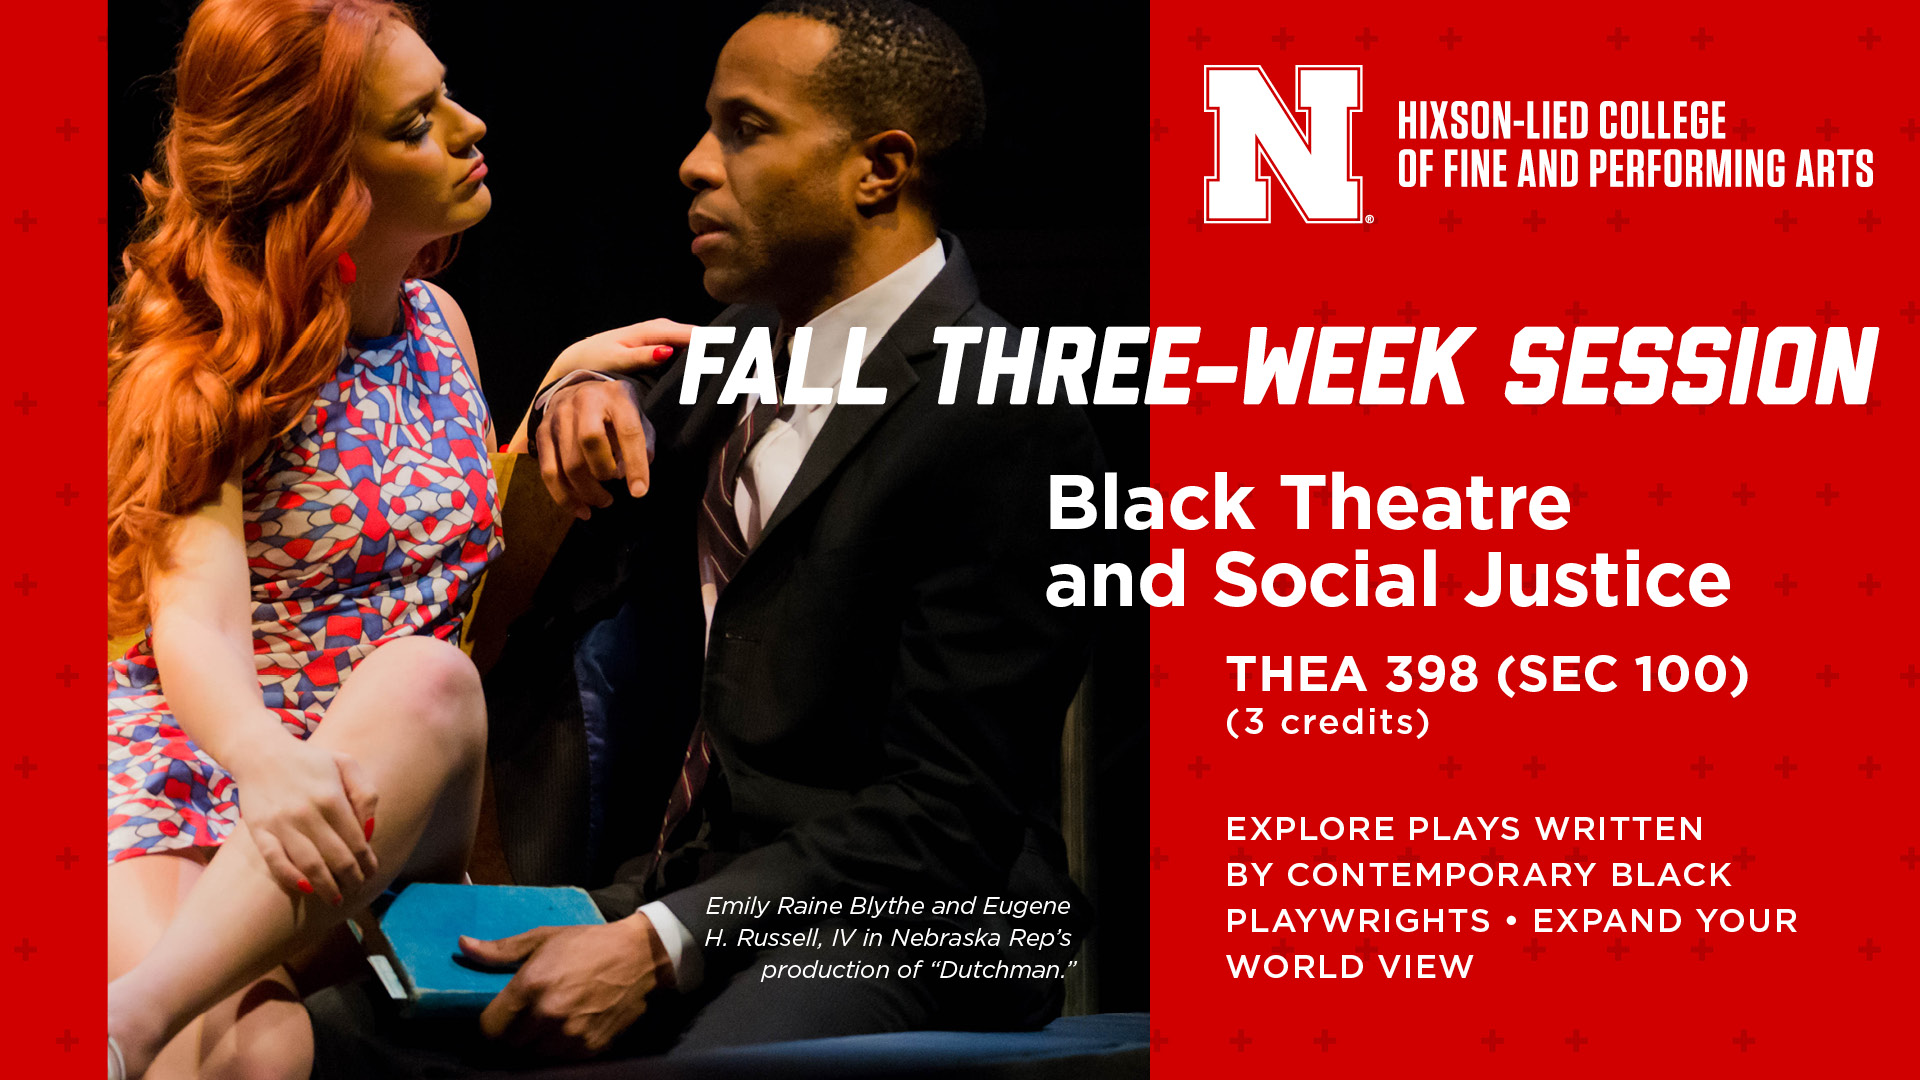 Black Theatre and Social Justice (THEA 398, Section 100) is among the courses offered during the Fall Three-Week Session.